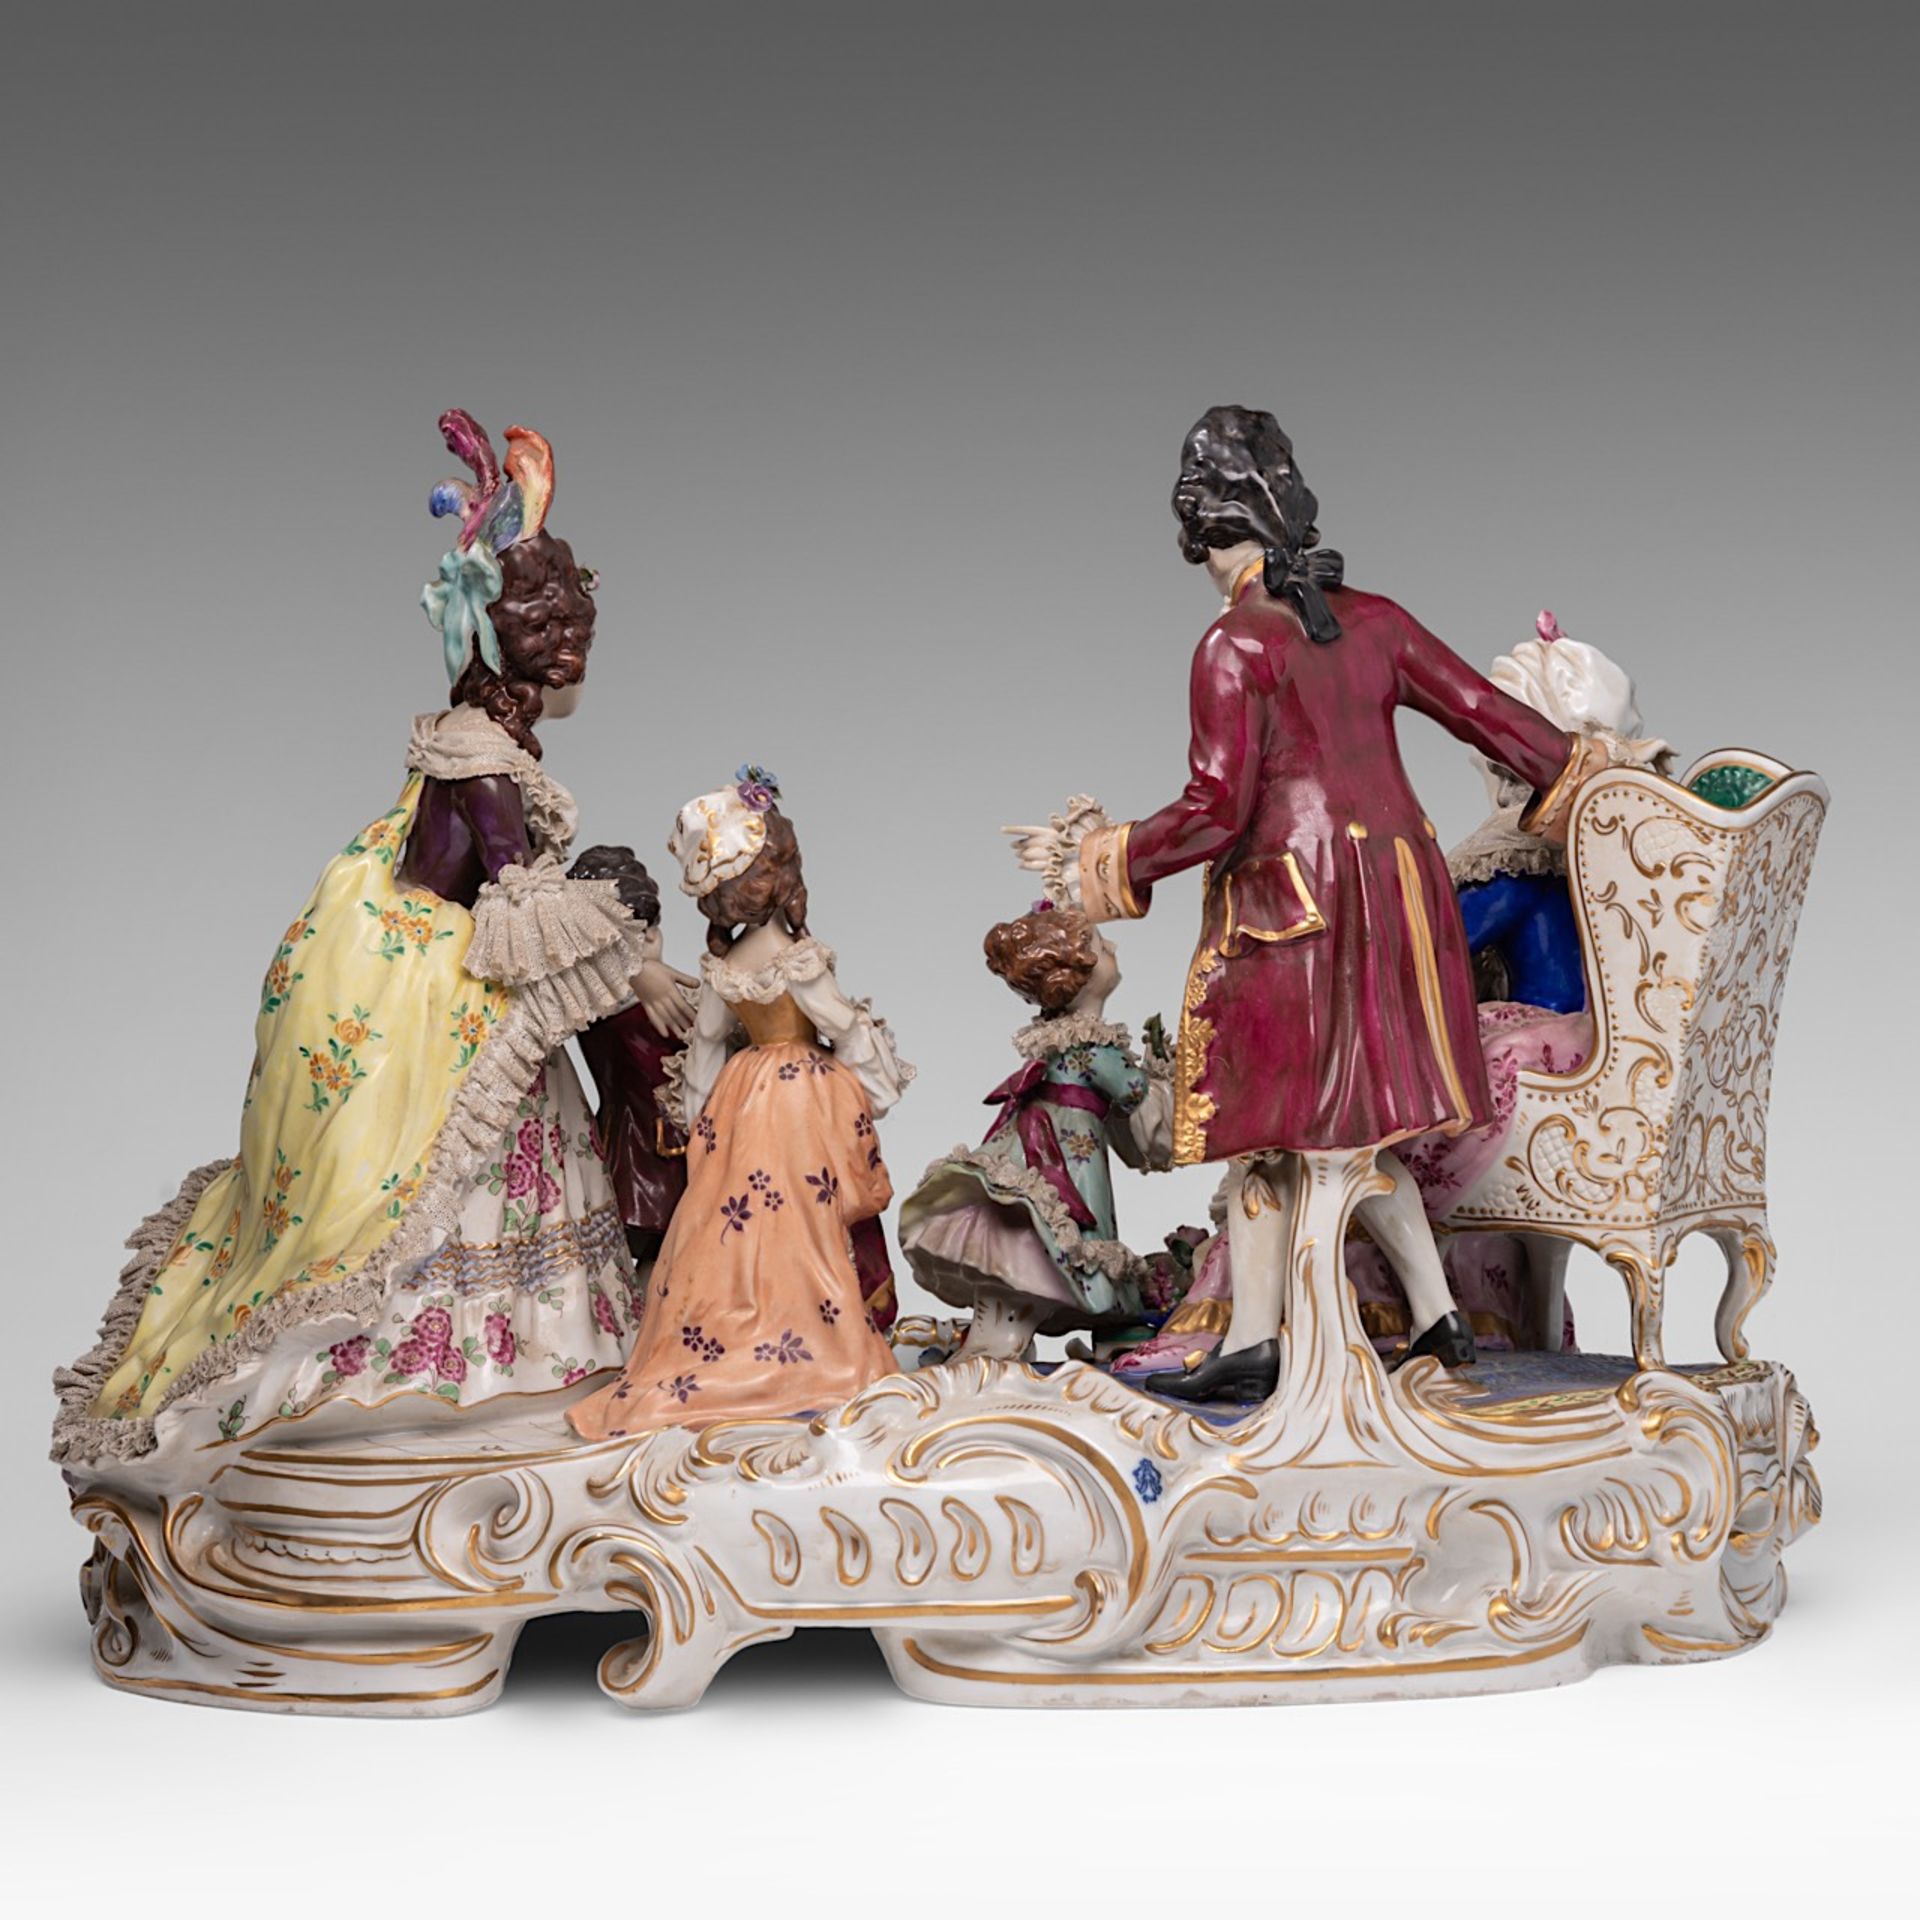 A large Saxony polychrome porcelain group depicting a gallant scene in a Rococo setting, H 40 - W 55 - Bild 4 aus 15